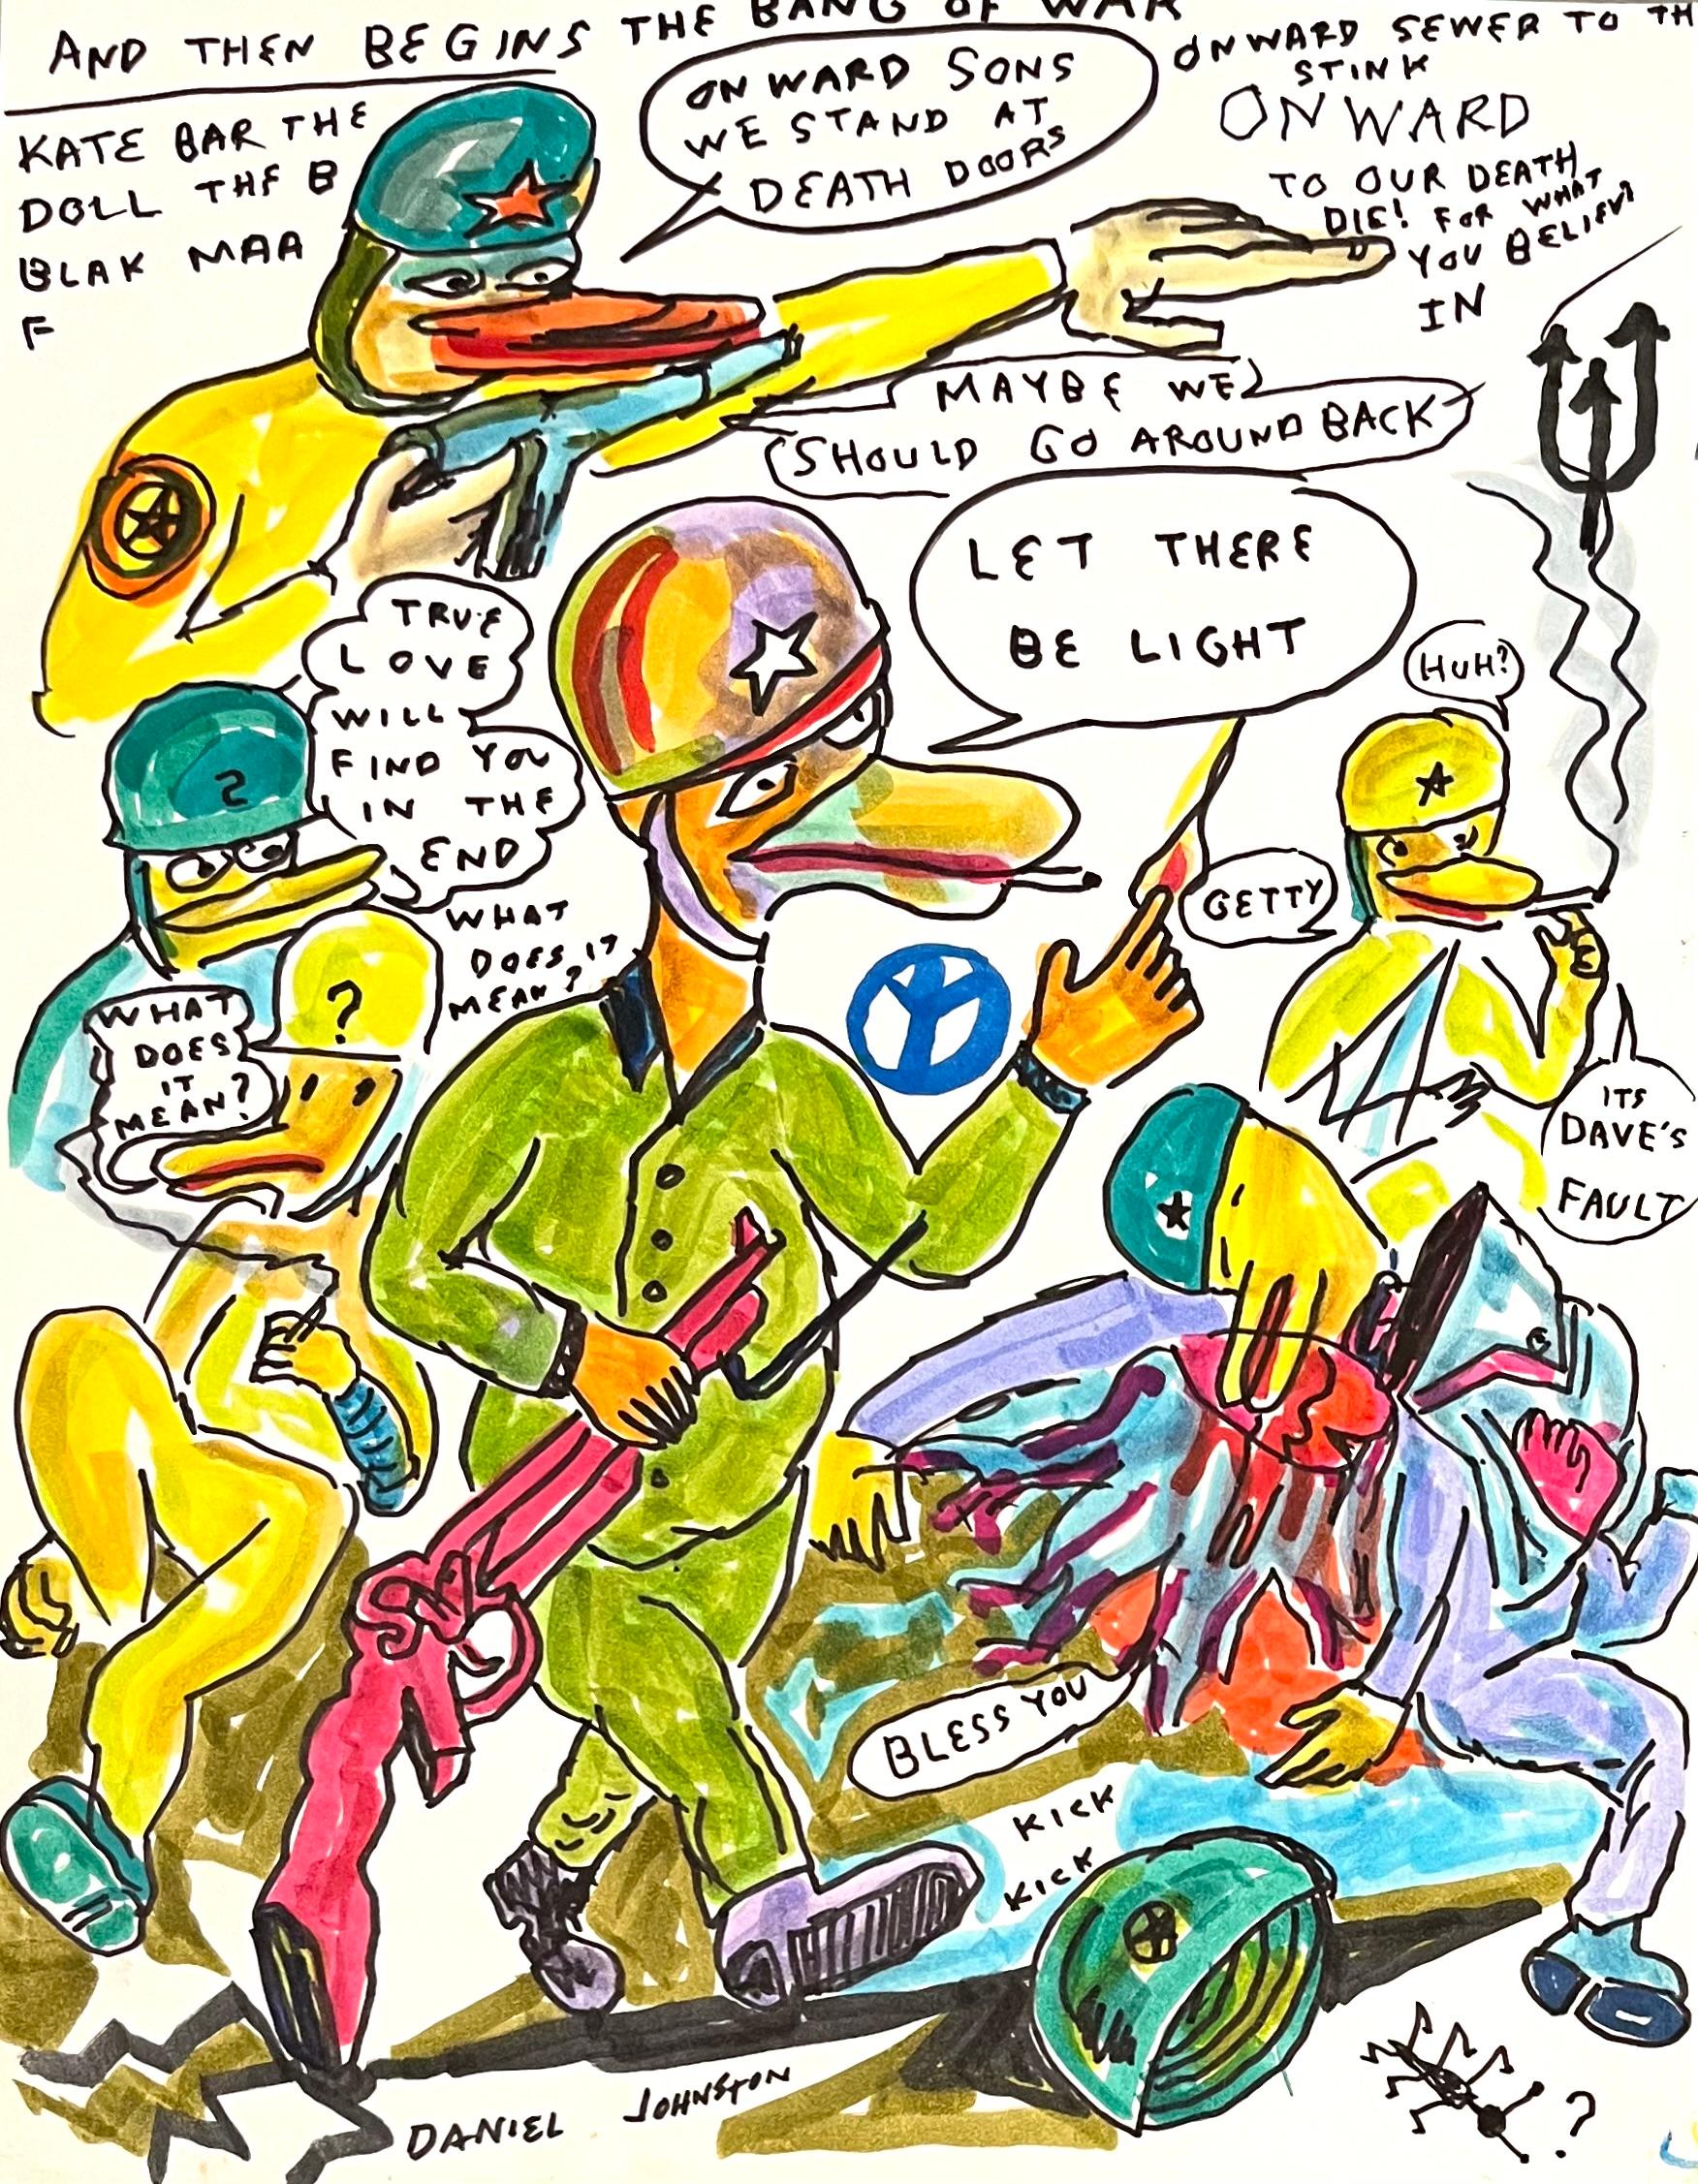 And Then Begins the Bang of War, Colorful Figurative Drawing, Duck Wars Series